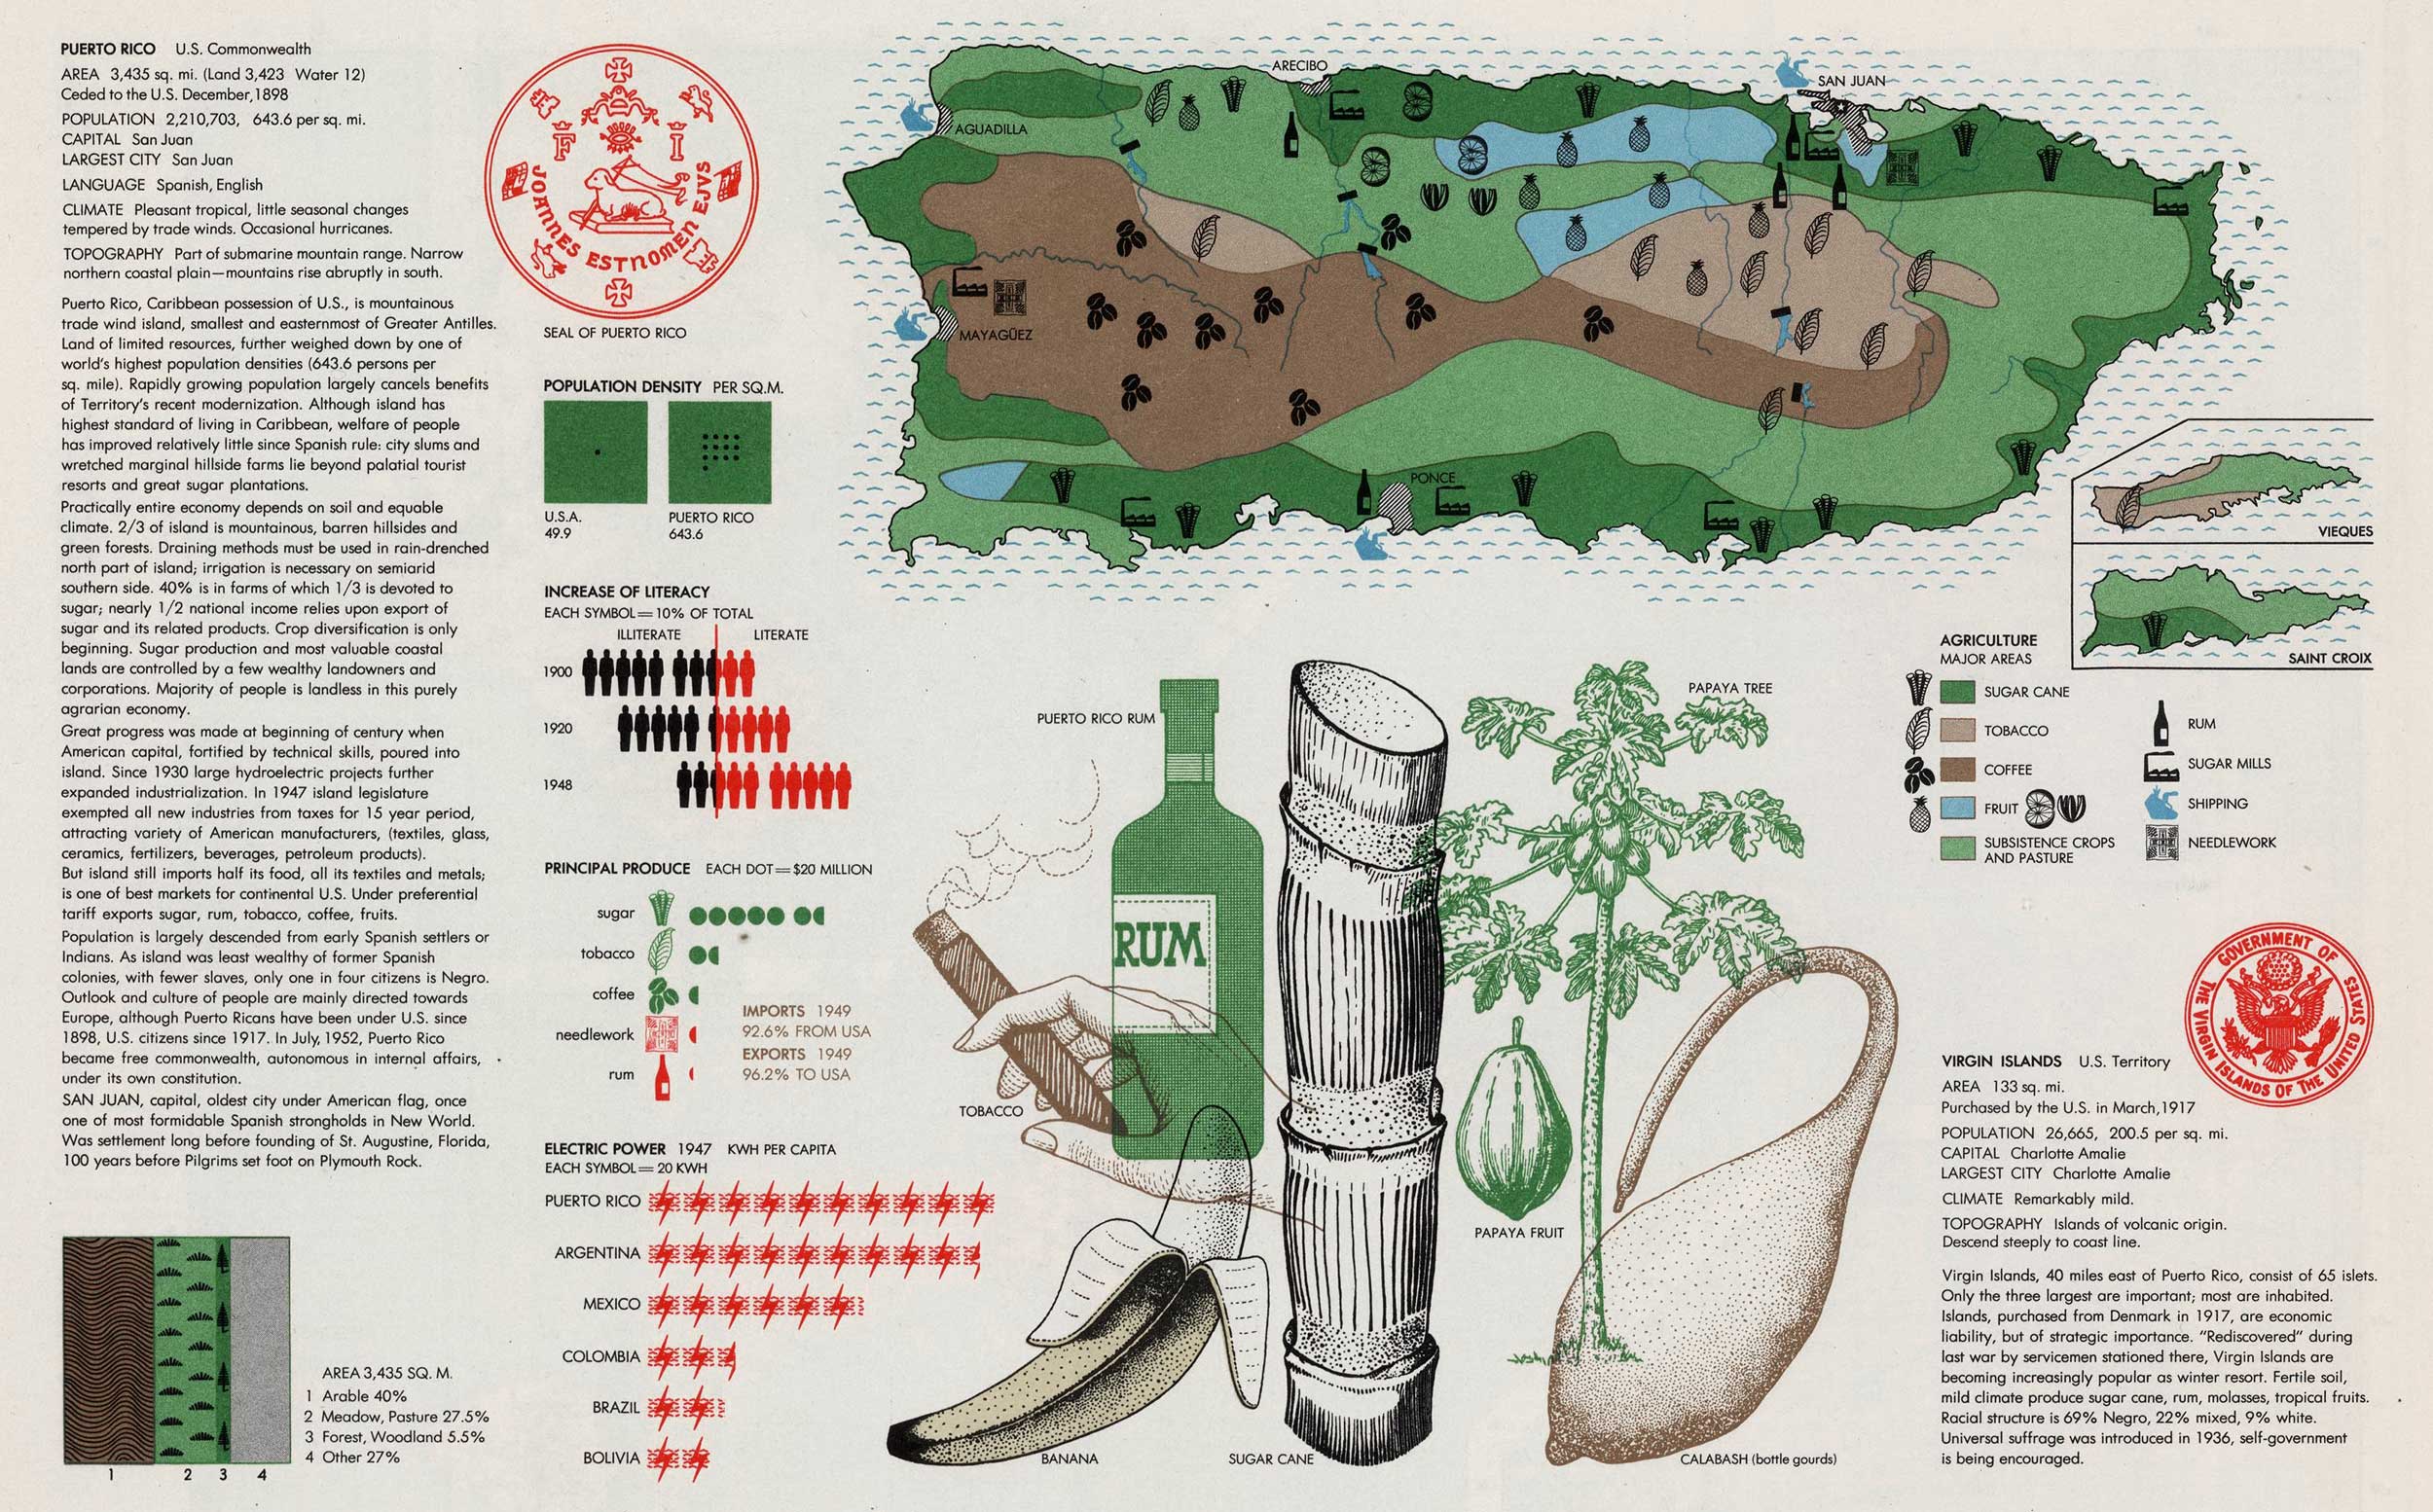 Agricultural and industrial charts and maps of Puerto Rico and the Virgin Islands. Bayer, Herbert. World Geo-Graphic Atlas: A Composite of Man's Environment. Chicago: Container Corporation of America, 1953. Courtesy of the Digital Public Library of America.